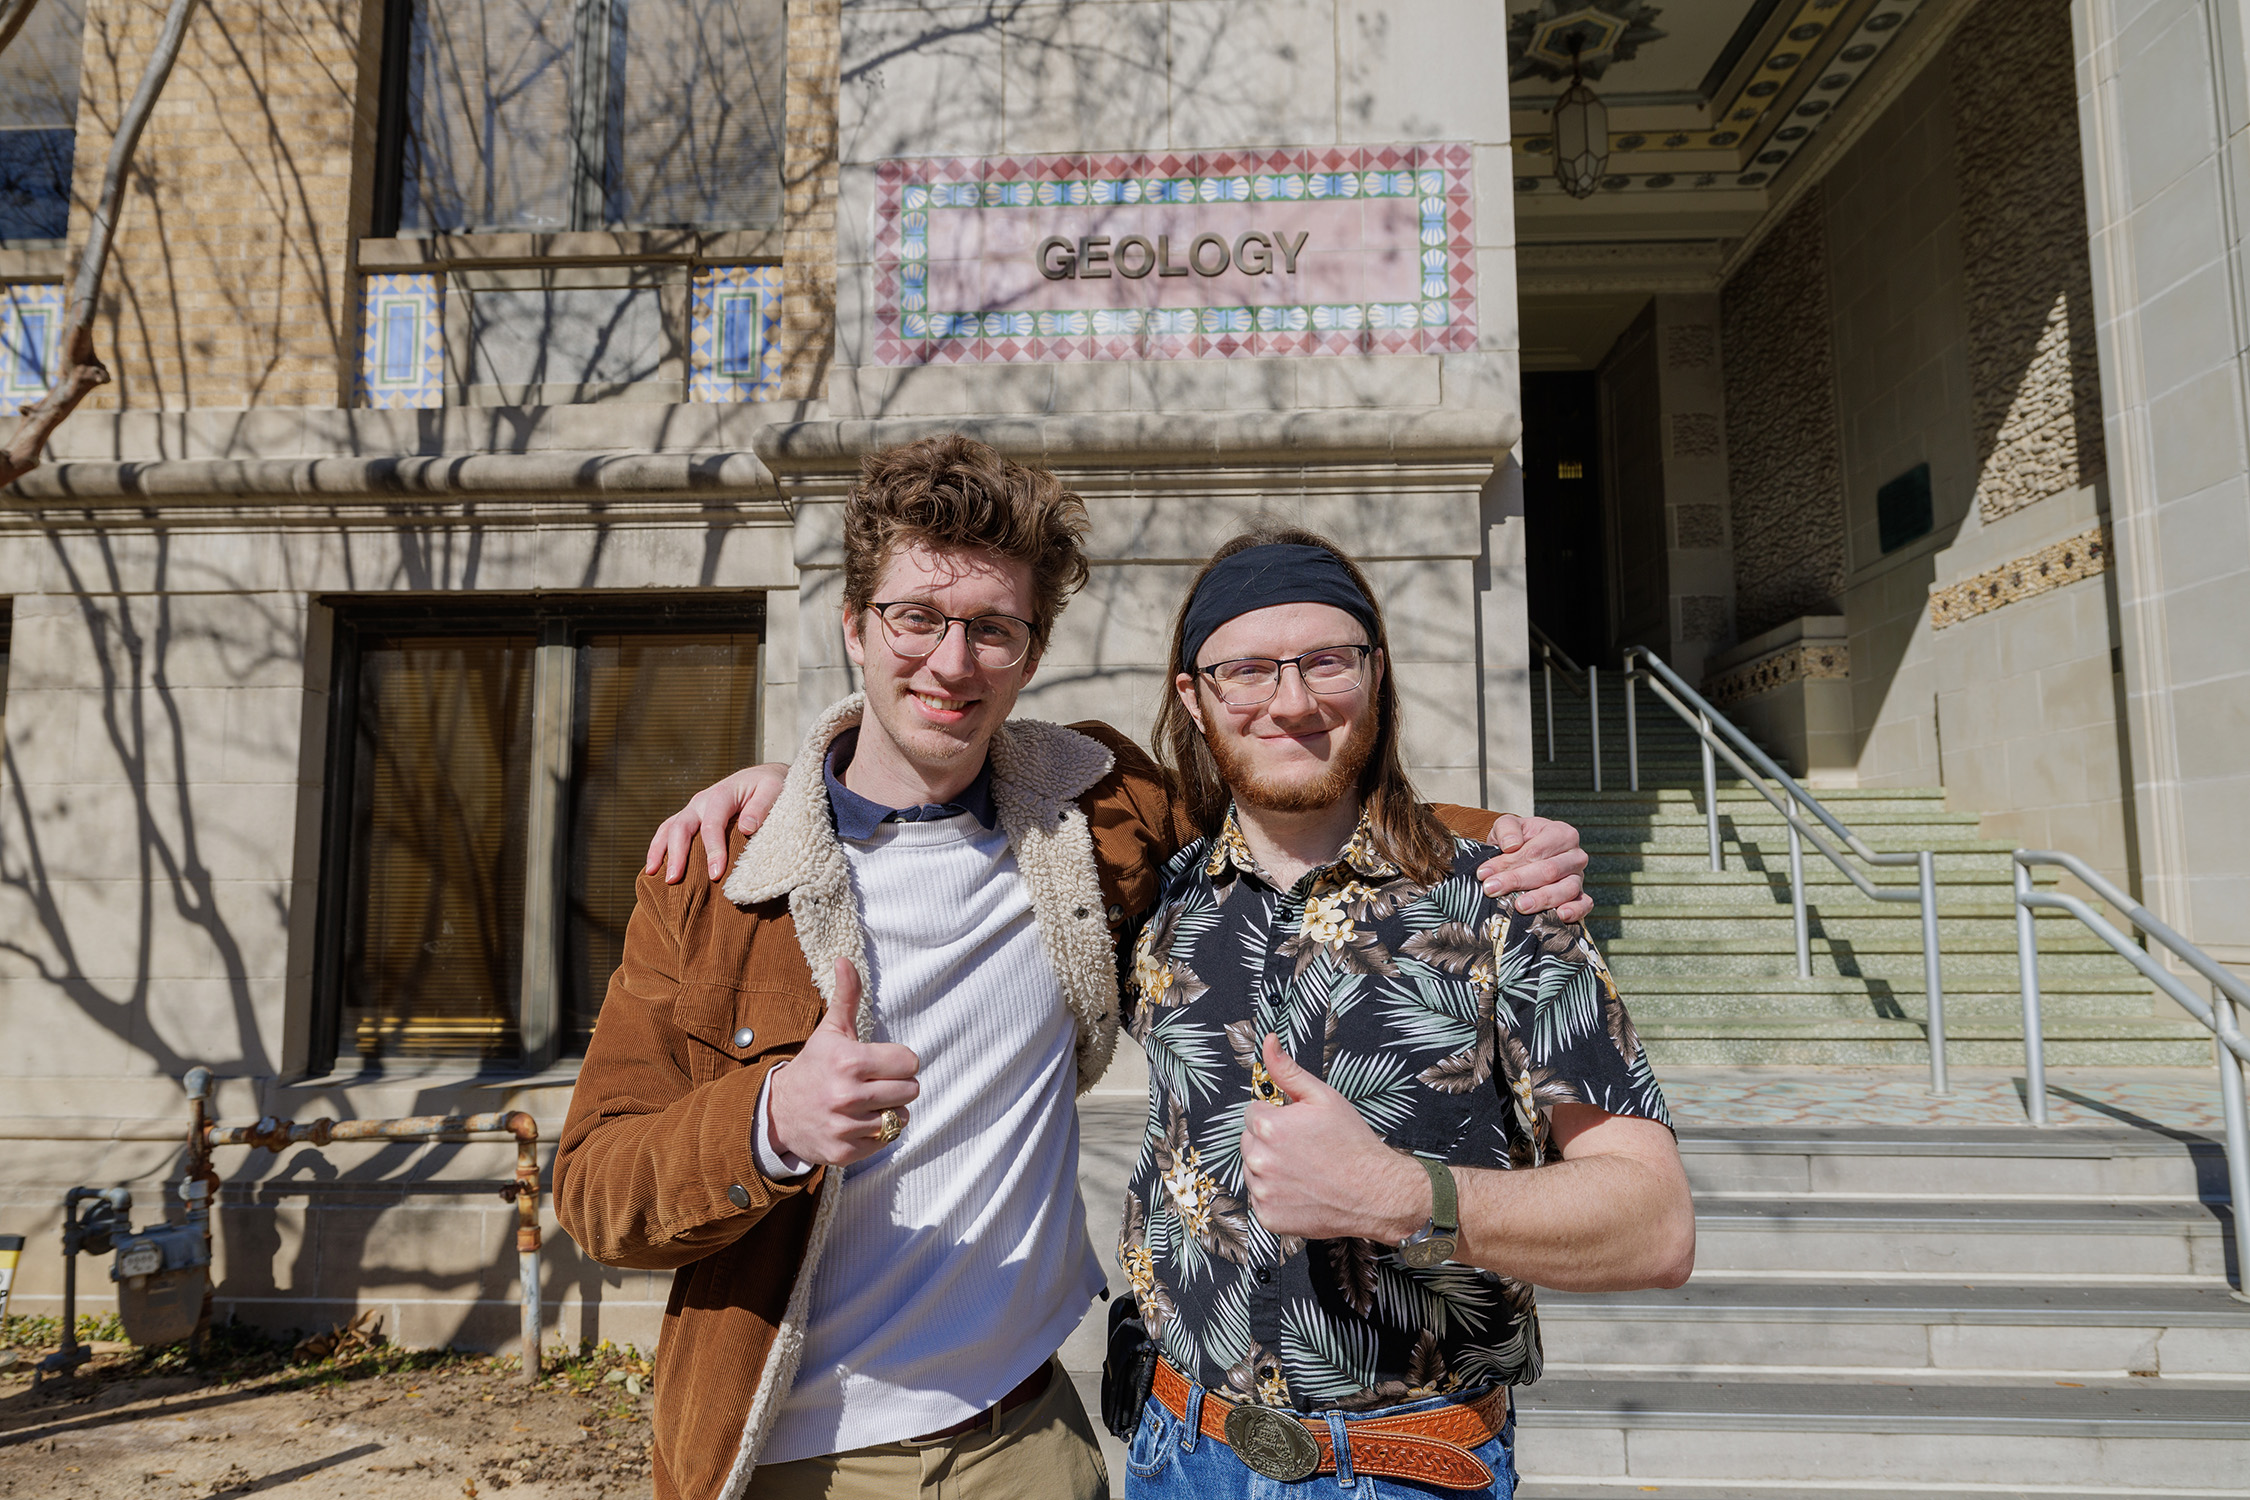 Texas A&amp;M University geology graduate students Dirk van de Laar and Reid "Zeke" Buskirk pose arm in arm while flashing thumbs up signs outside the Halbouty Geosciences Building on the Texas A&amp;M campus